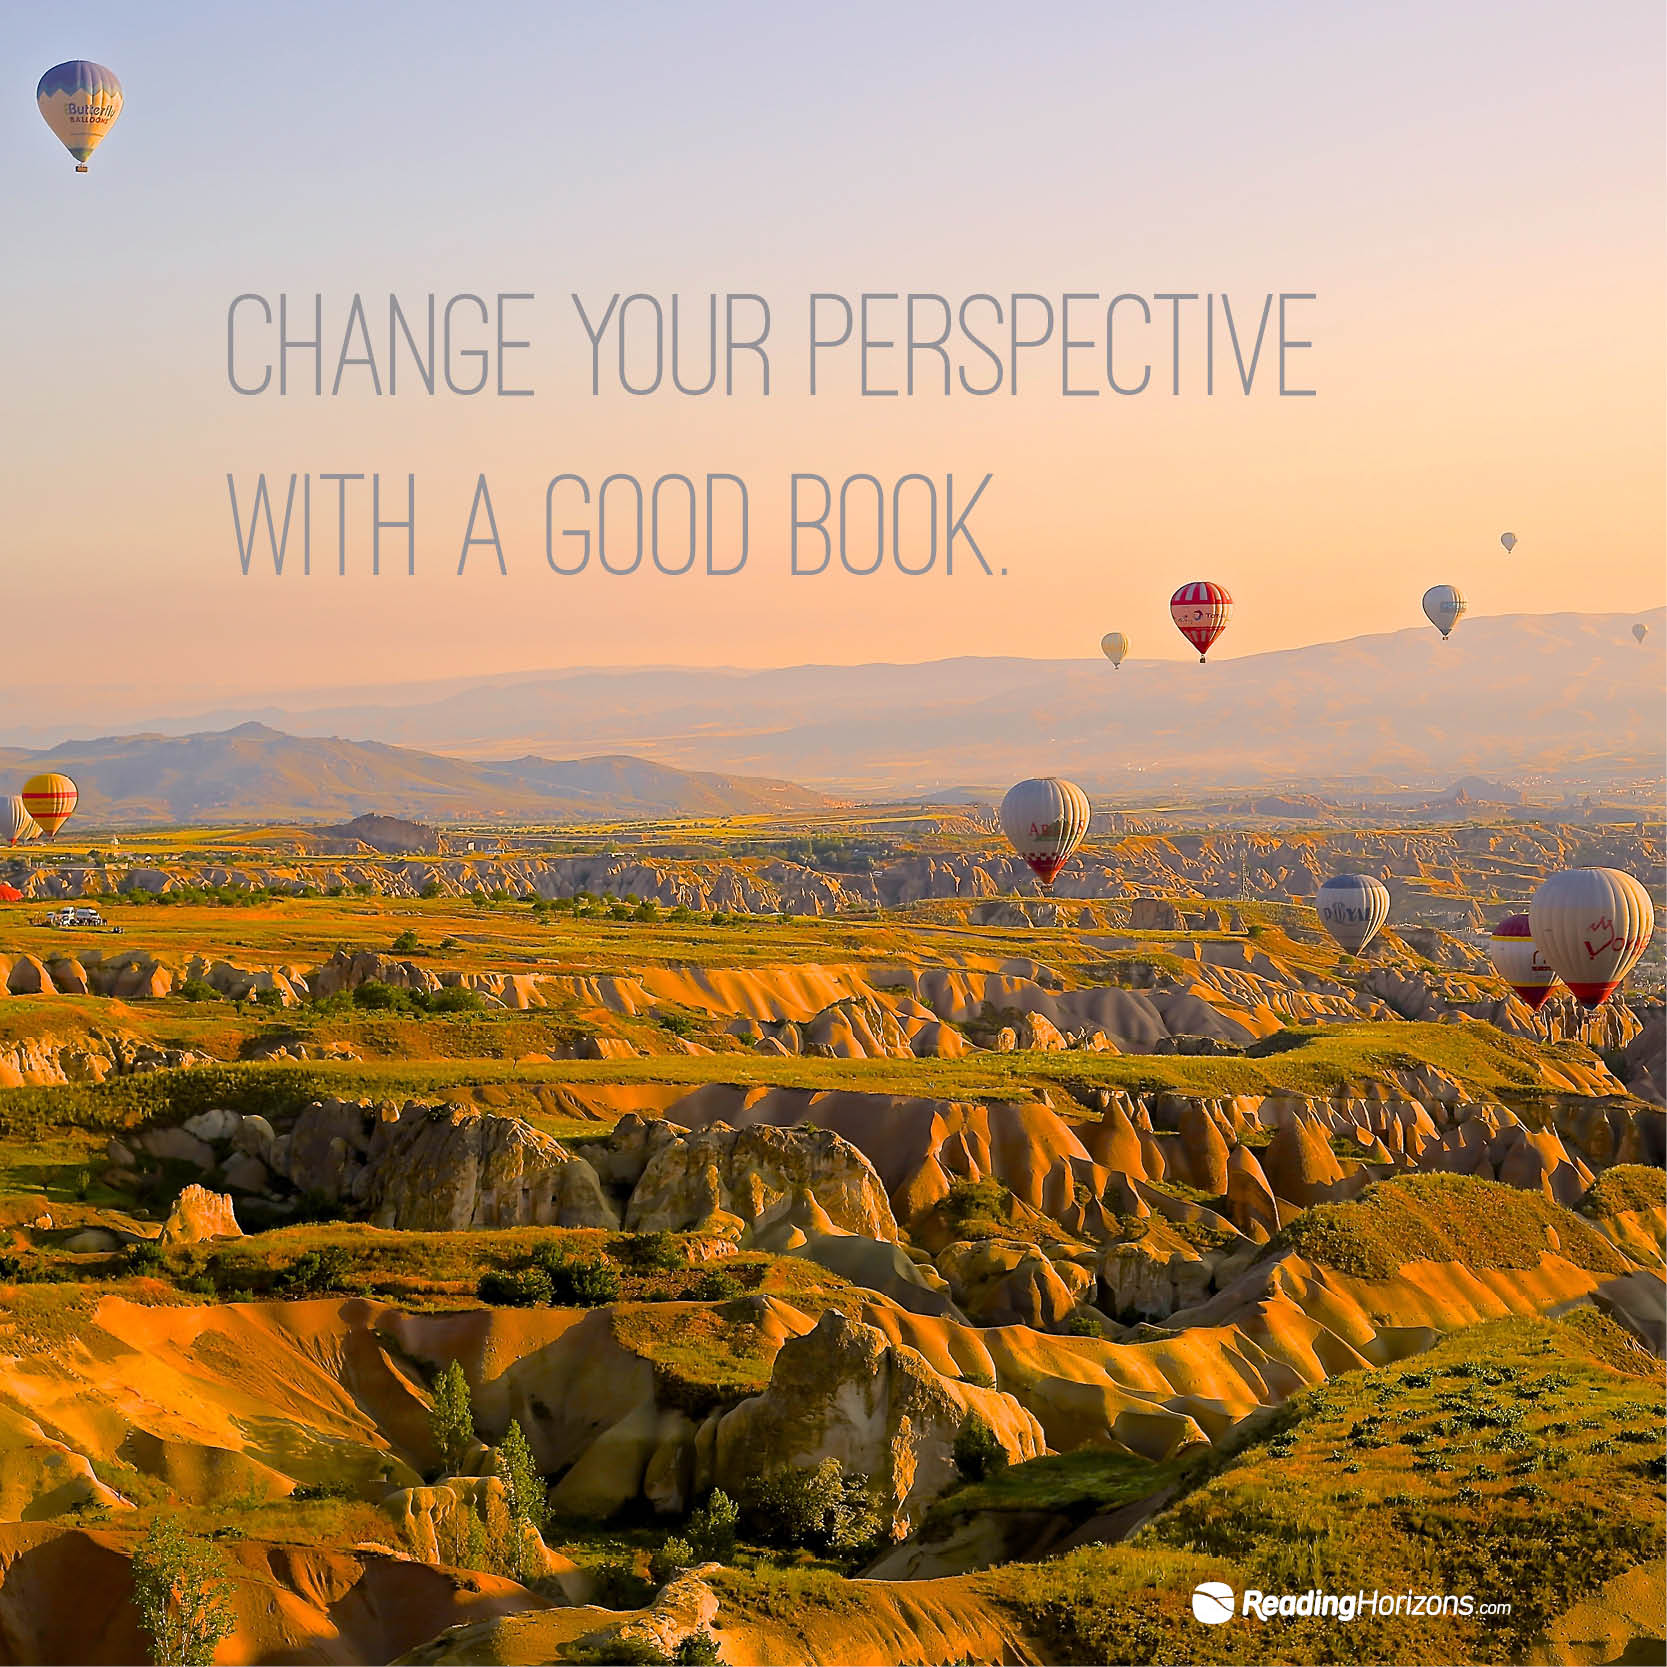 A meme of many hot air balloons flying over rolling hills with the words "Change your perspective with a good book."